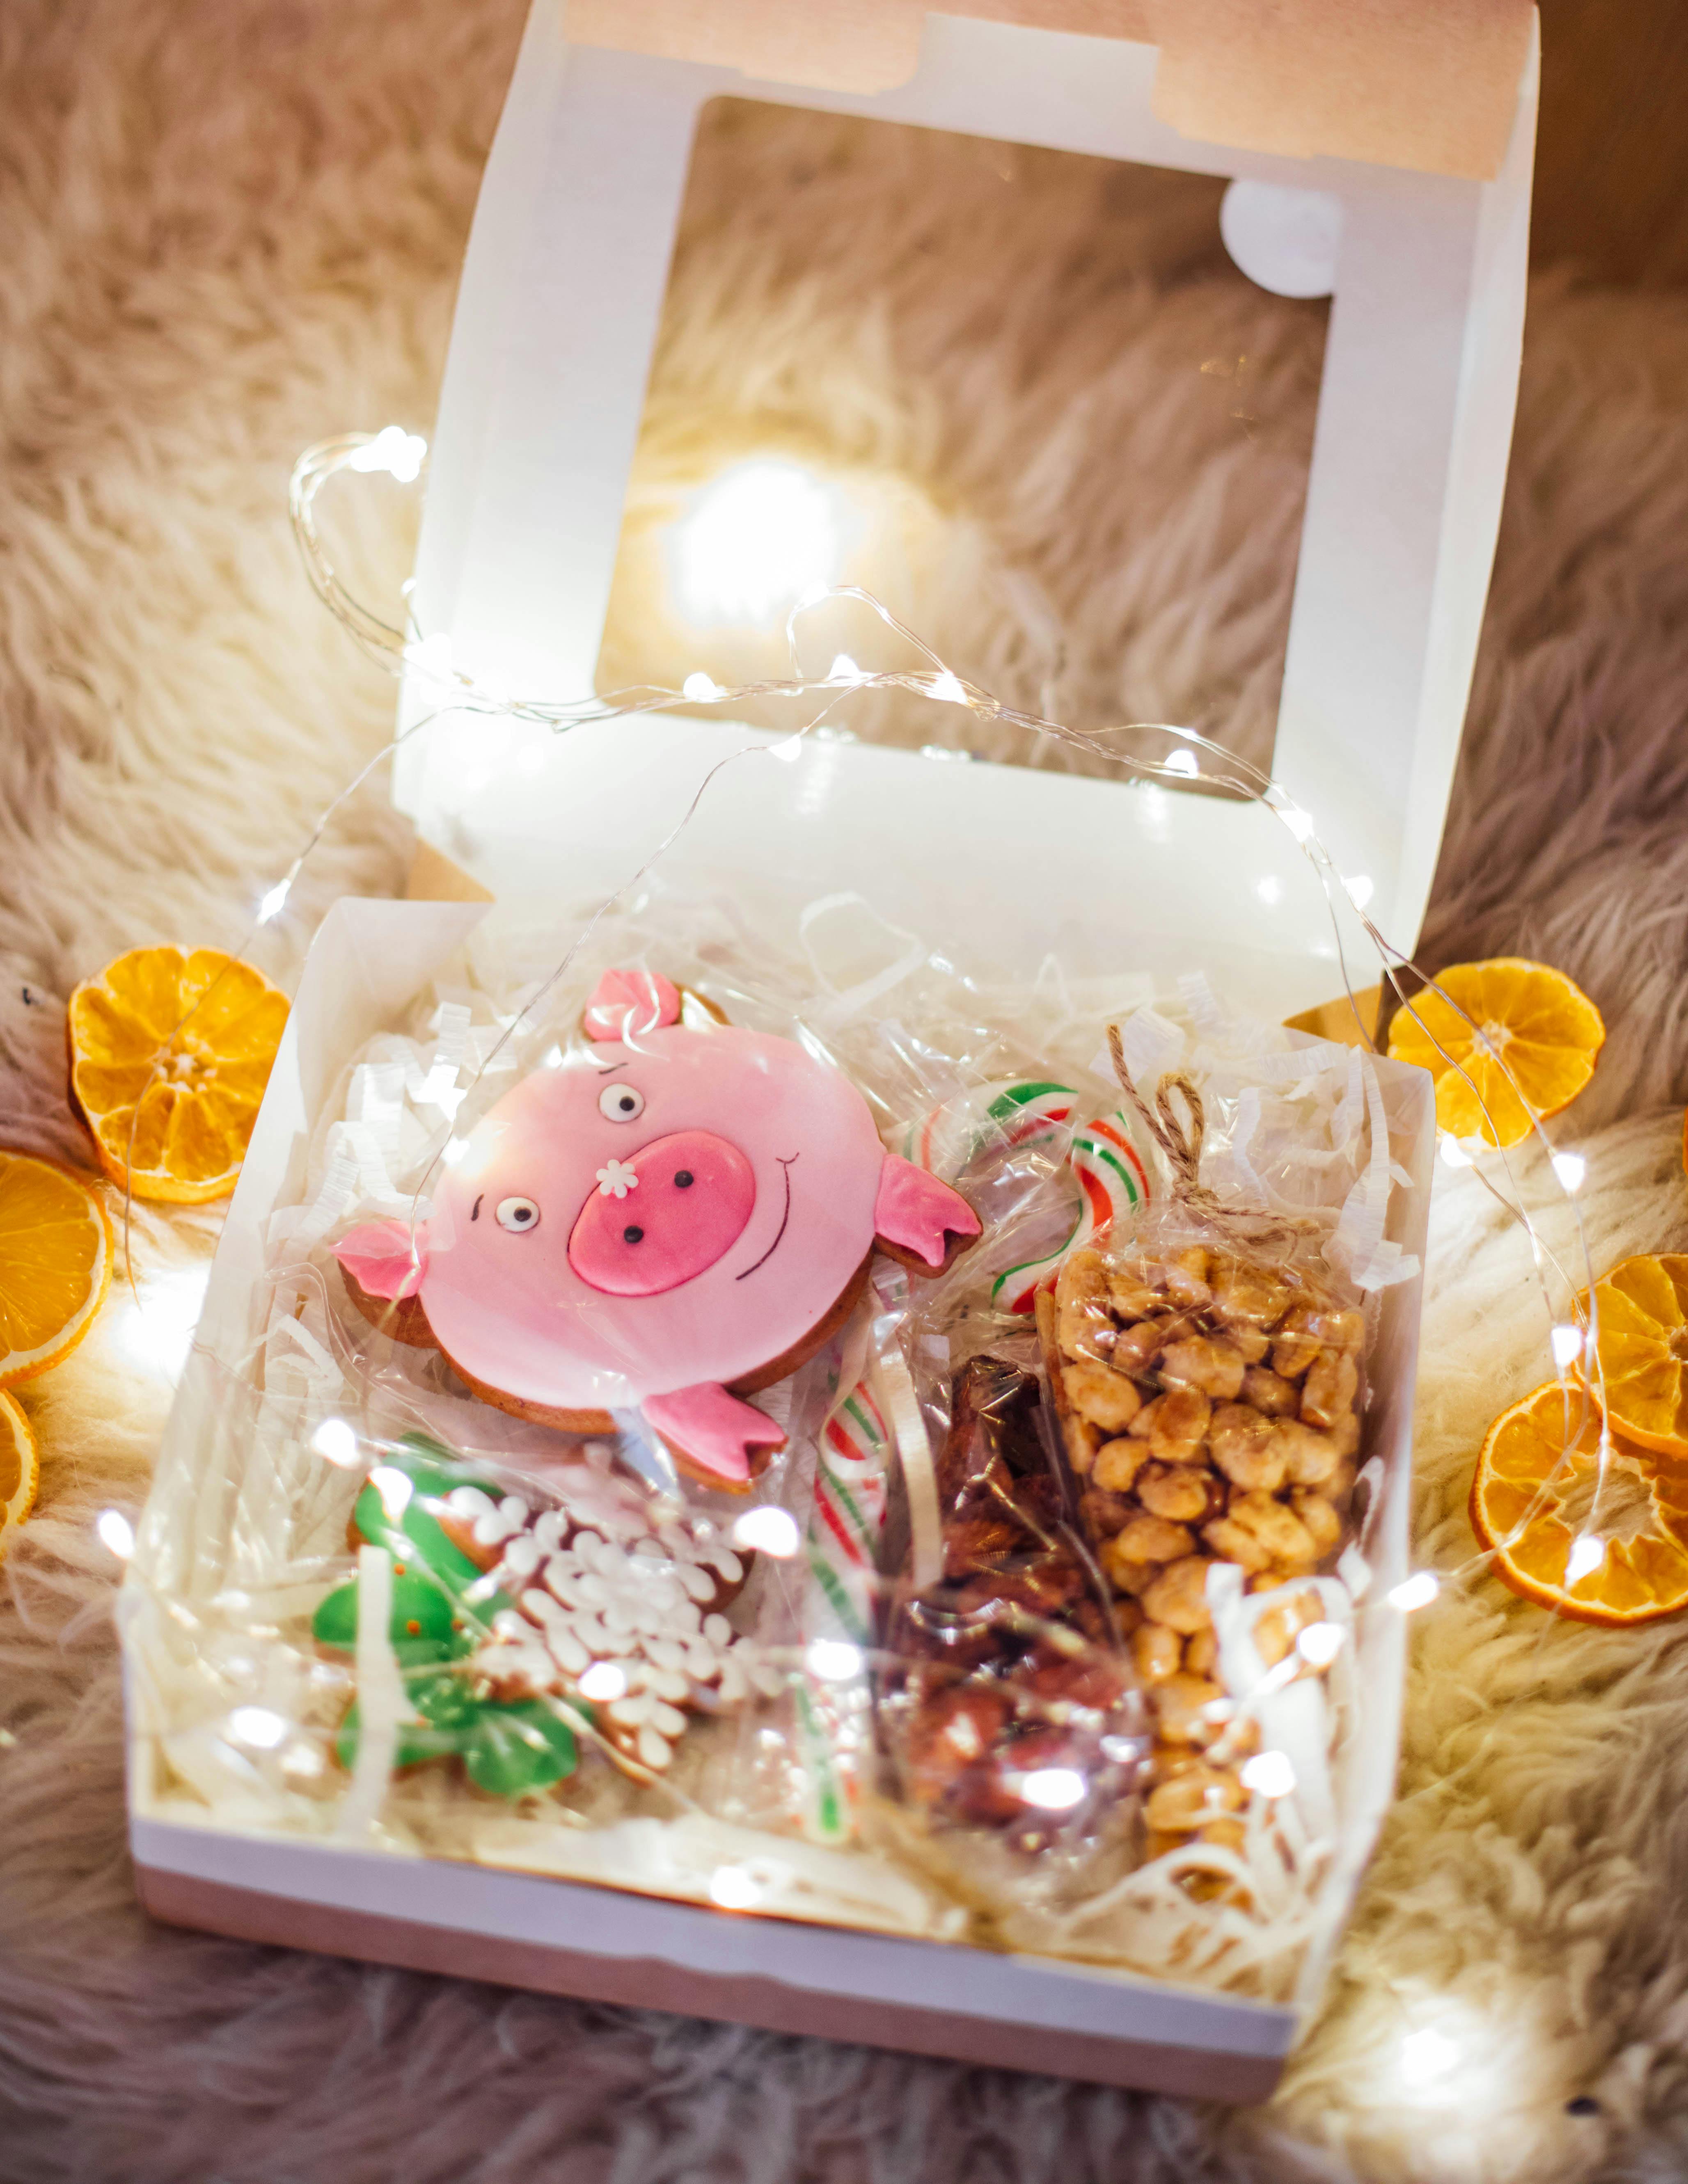 Assorted cookies in a box with a transparent cover in the middle. | Source: Pexels